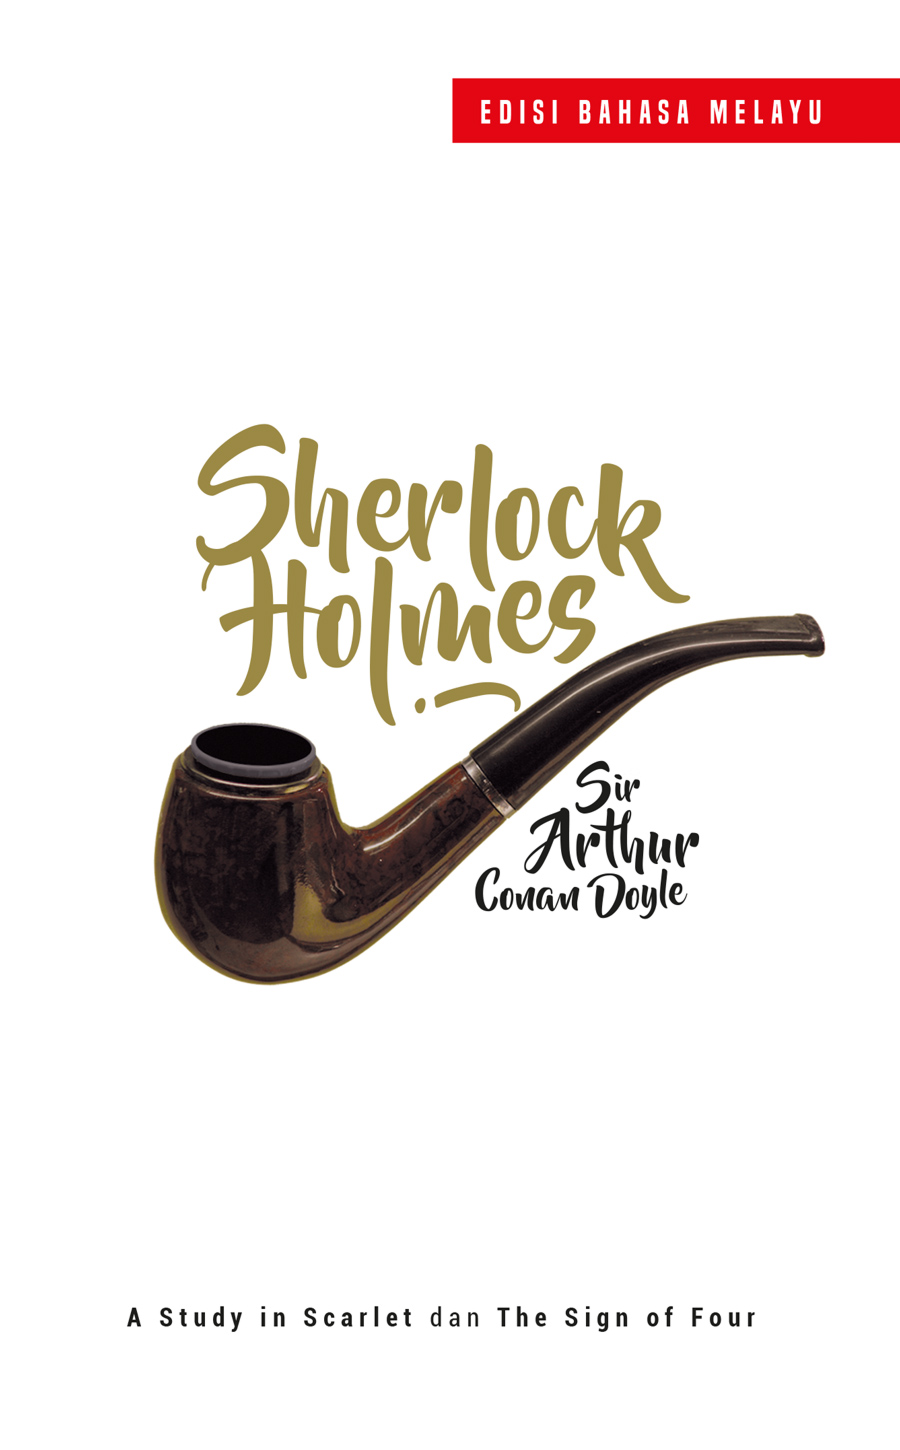 Sherlock Holmes A Study in Scarlet  dan The Sign of Four 